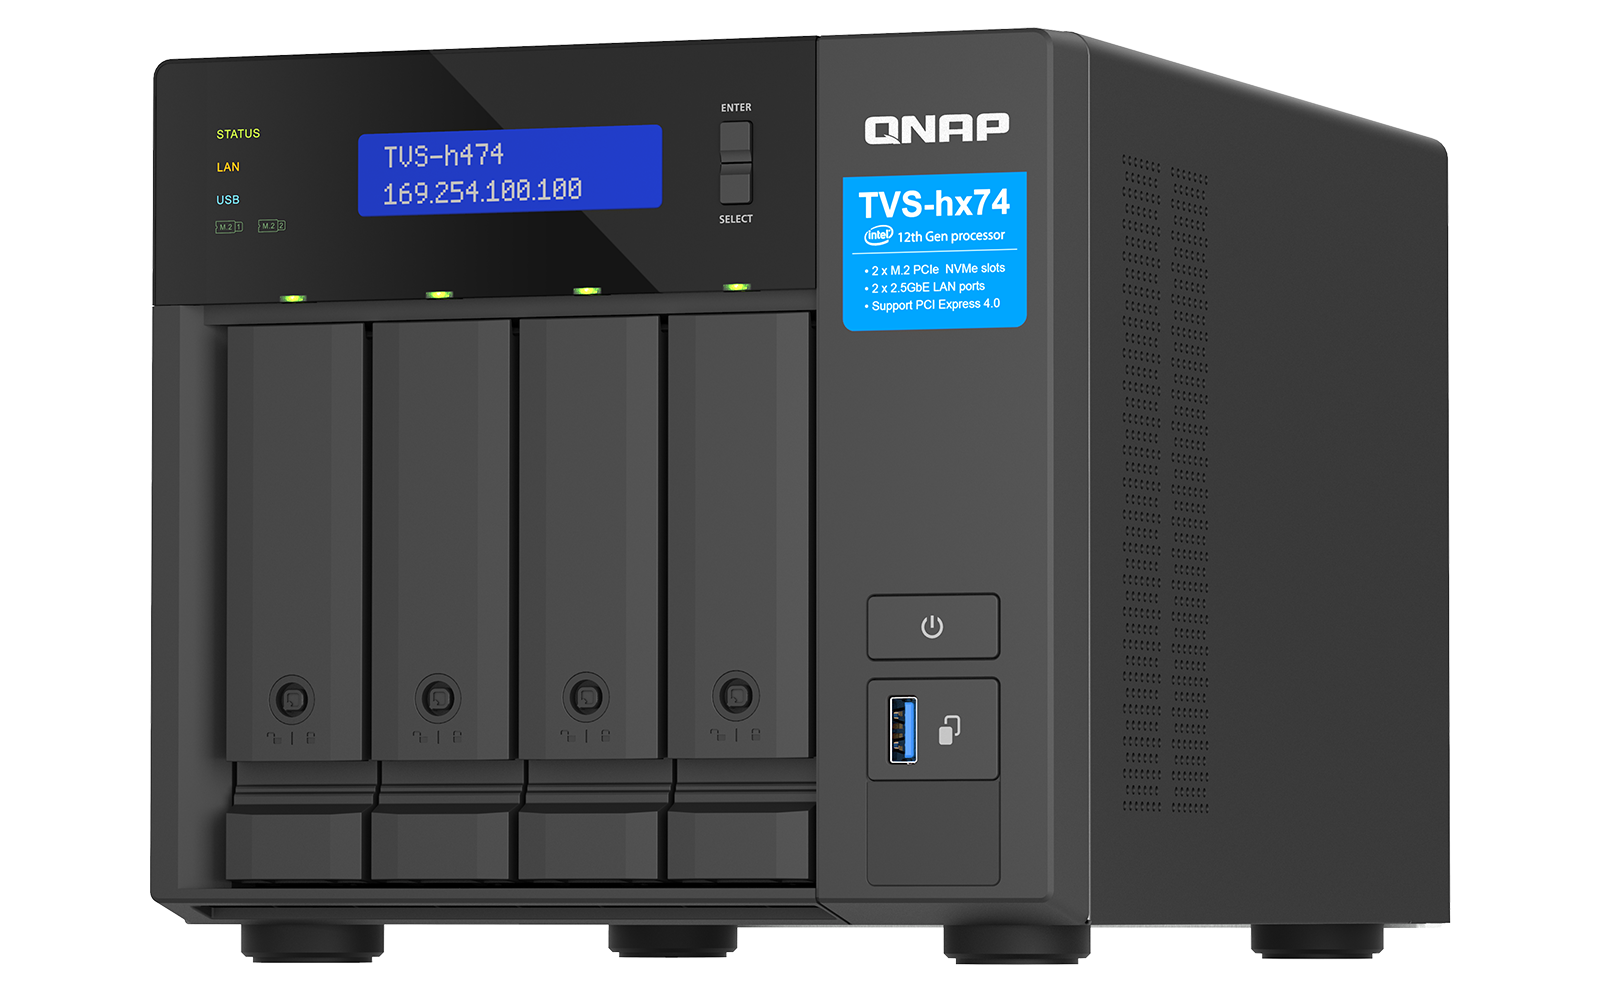 QNAP TVS-h474-PT-8G Highly-reliable ZFS-based storage with PCIe Gen 4 expandability for 10/25GbE connectivity M.2 NVMe SSD caching and multi-threads processors for virtualization applications